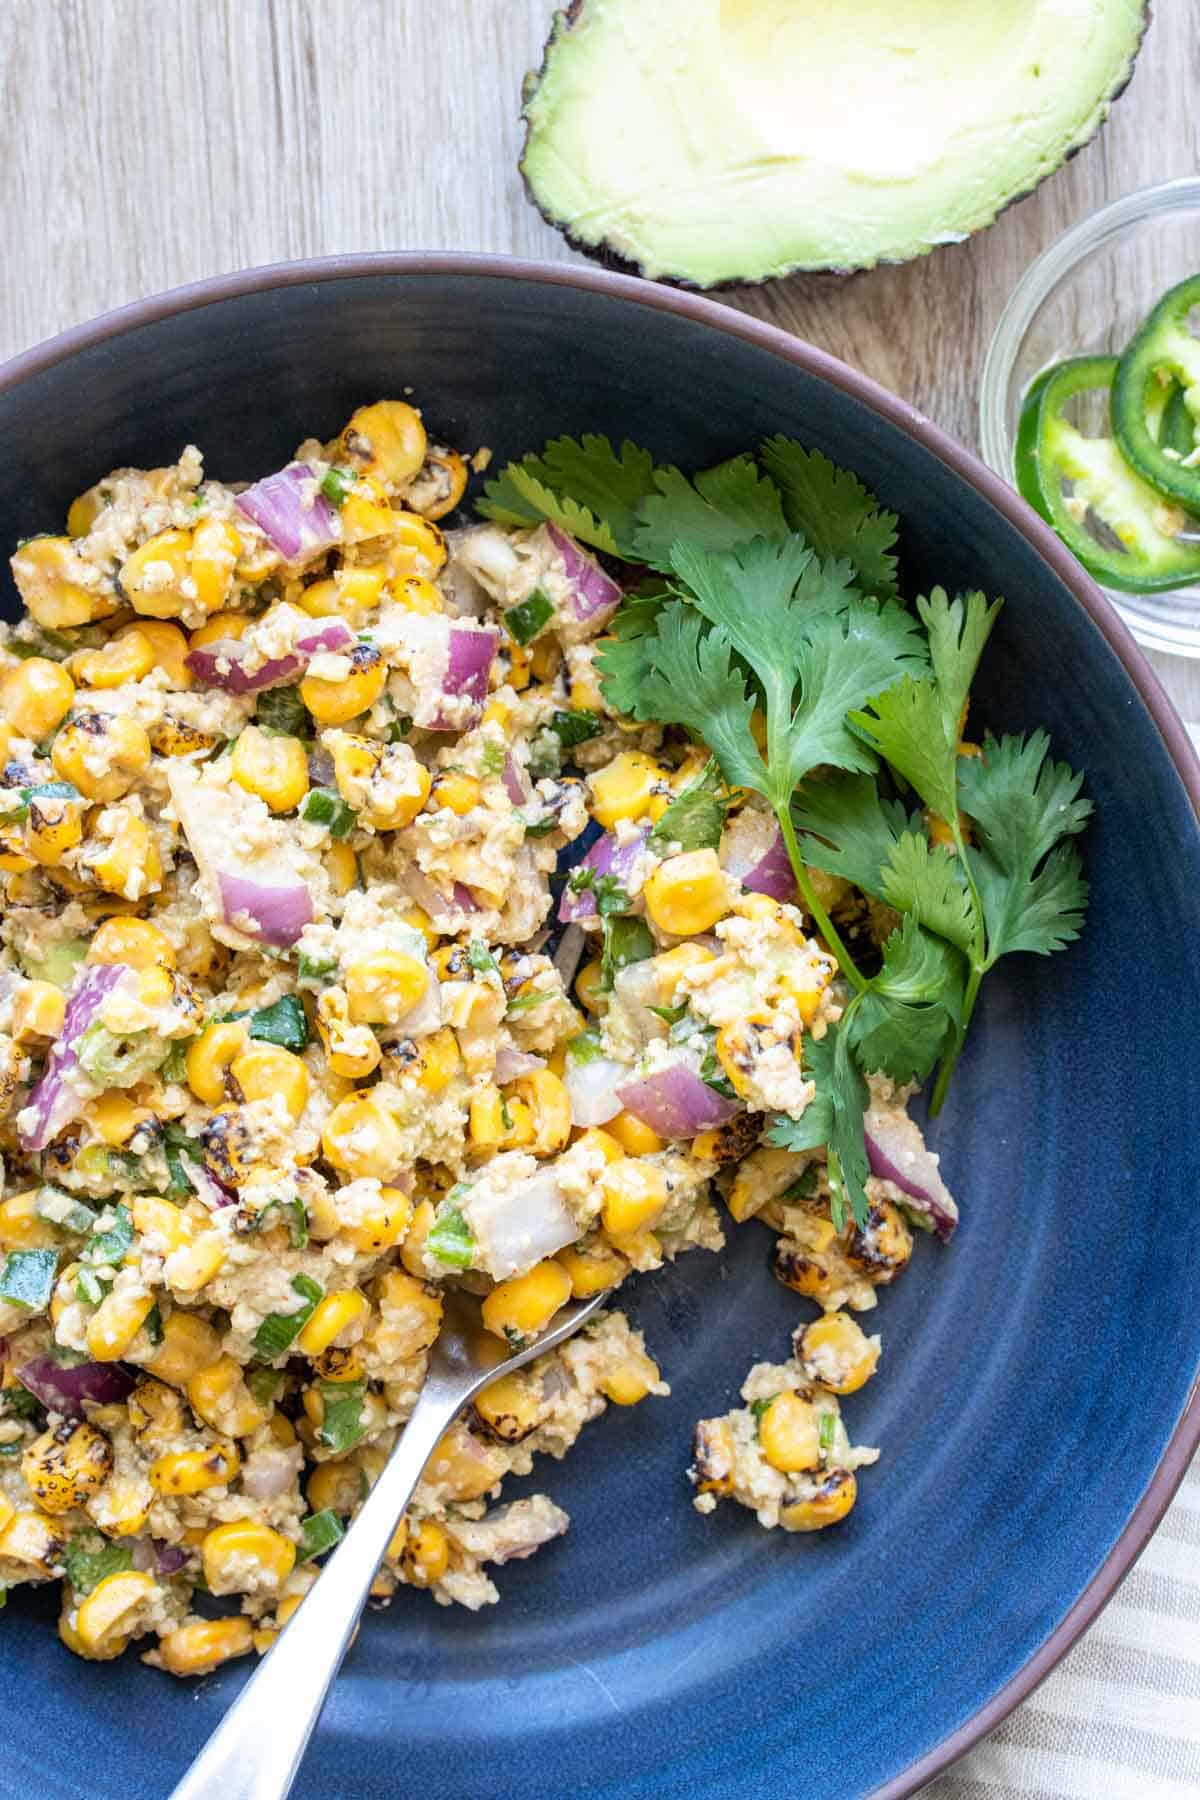 Dark blue bowl filled with corn salad and a sprig of cilantro.